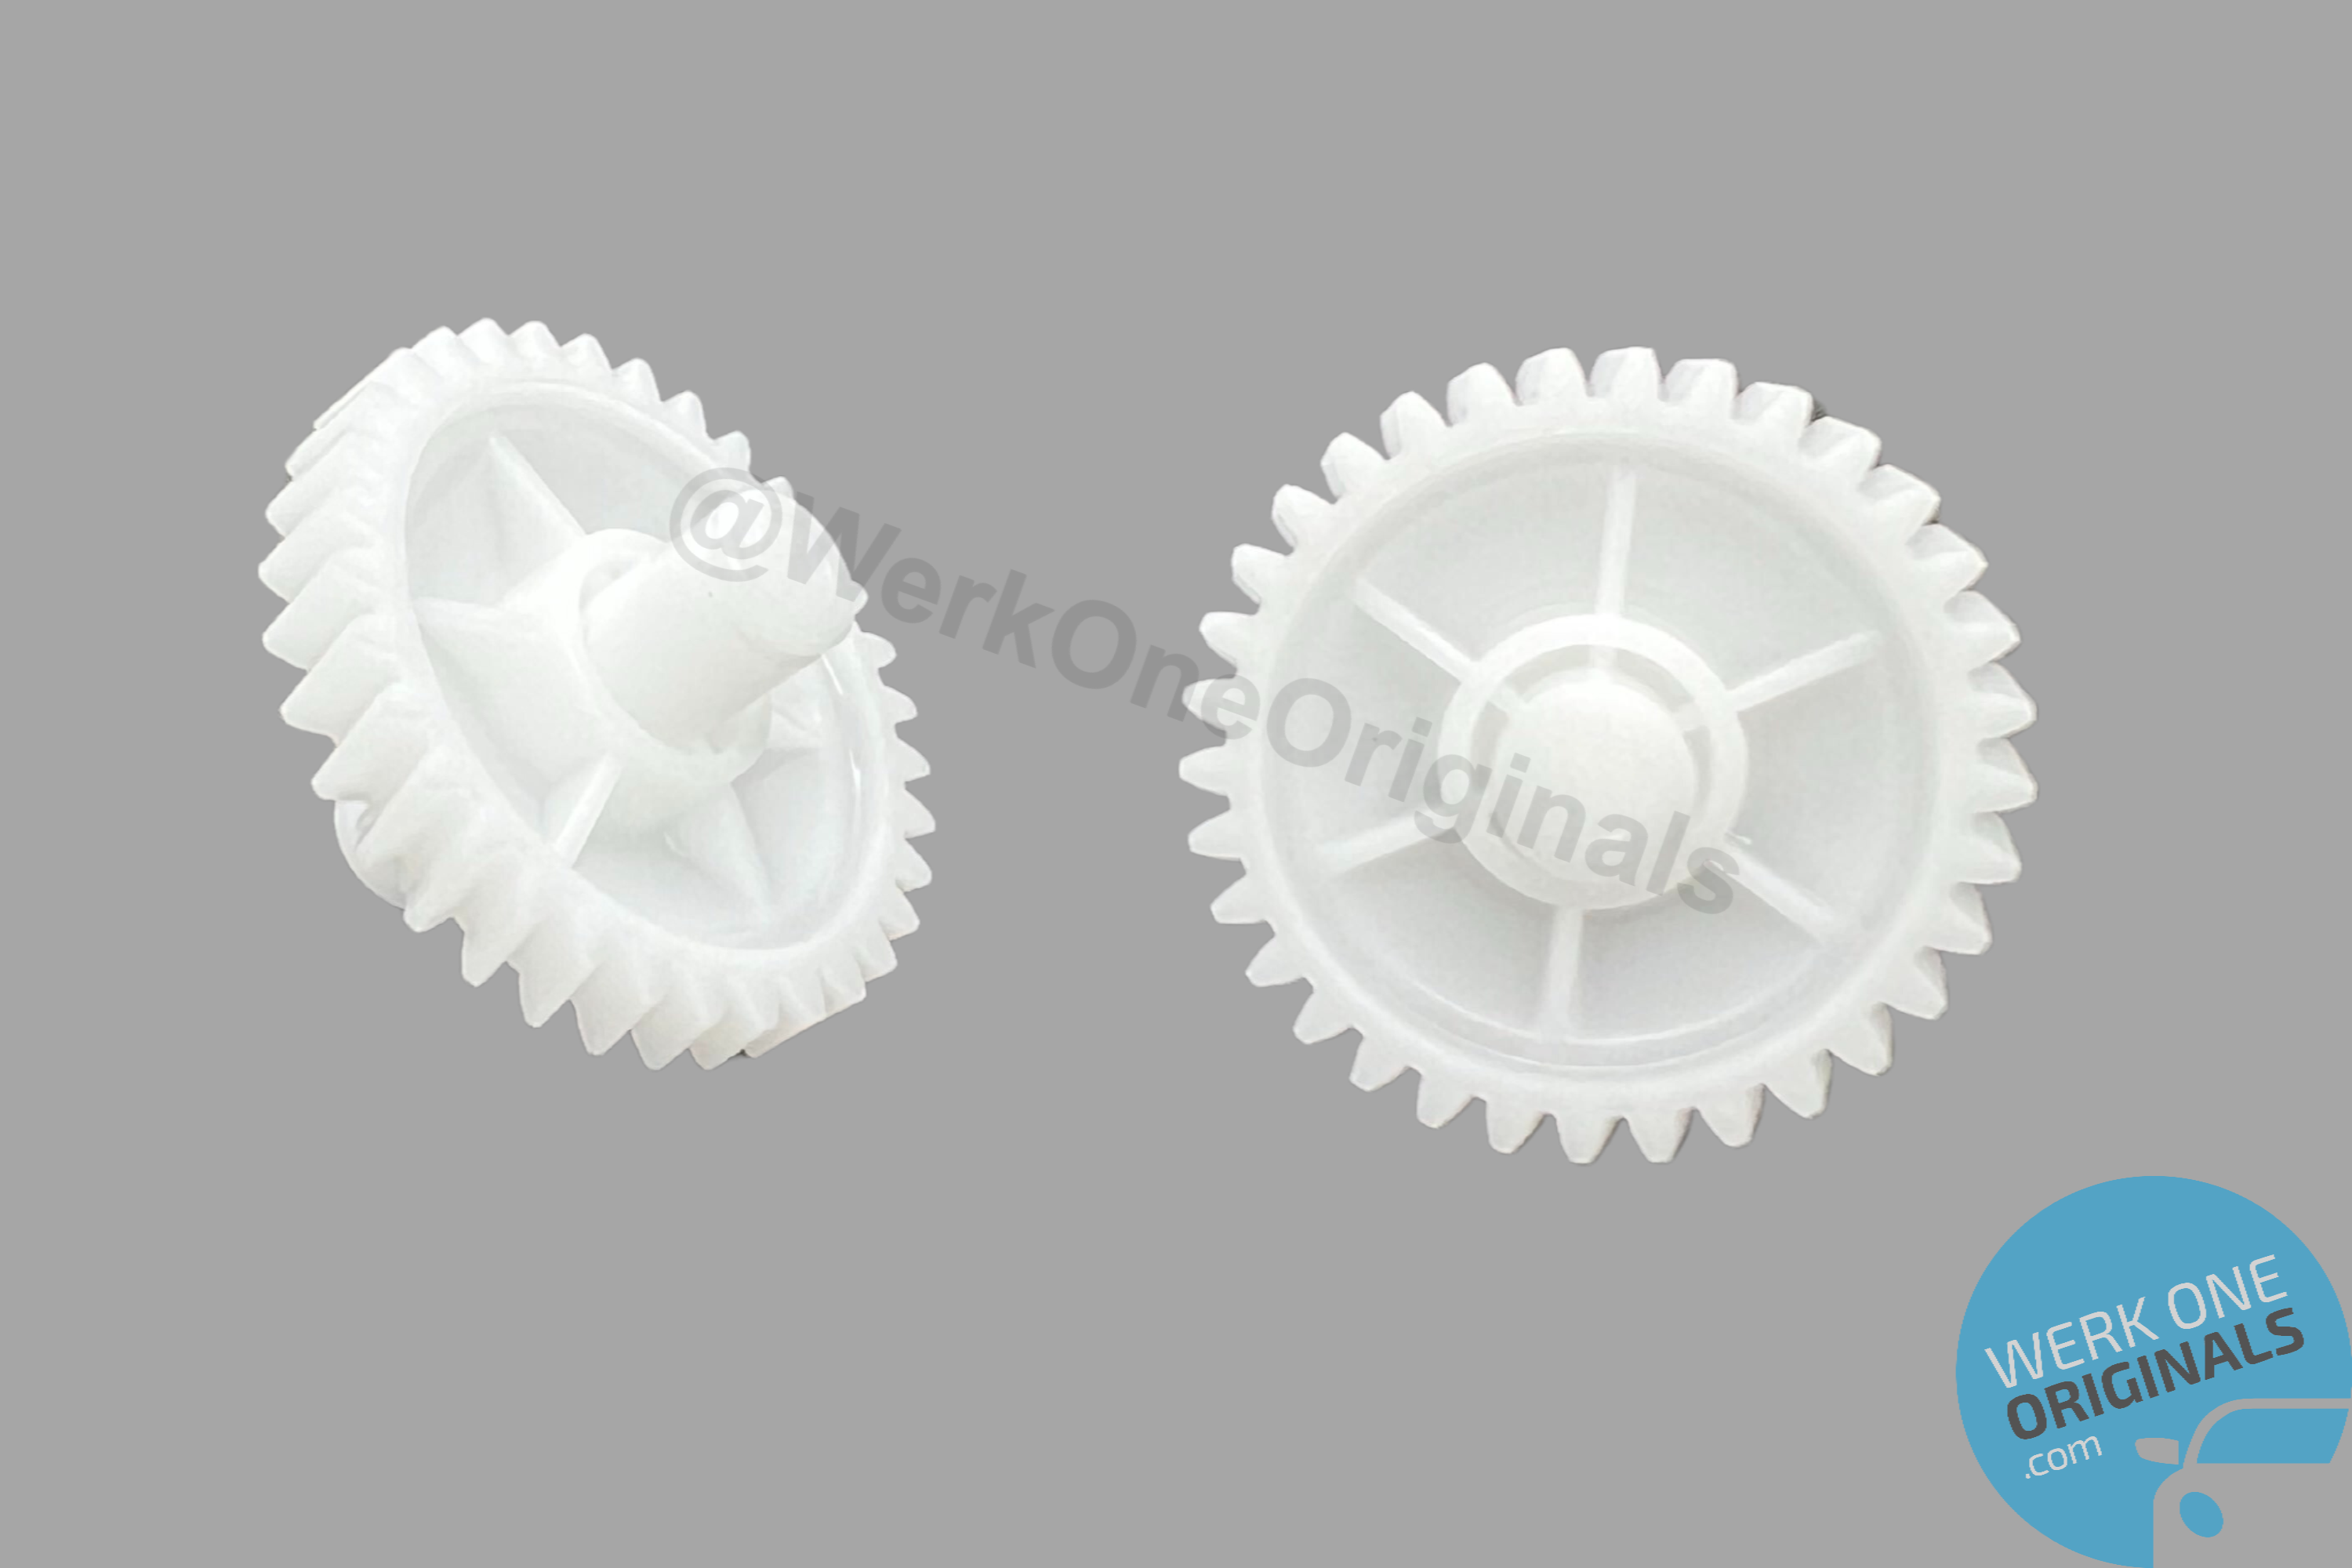 Porsche Genuine Replacement Sunroof Drive Gears x2 for 924S Models